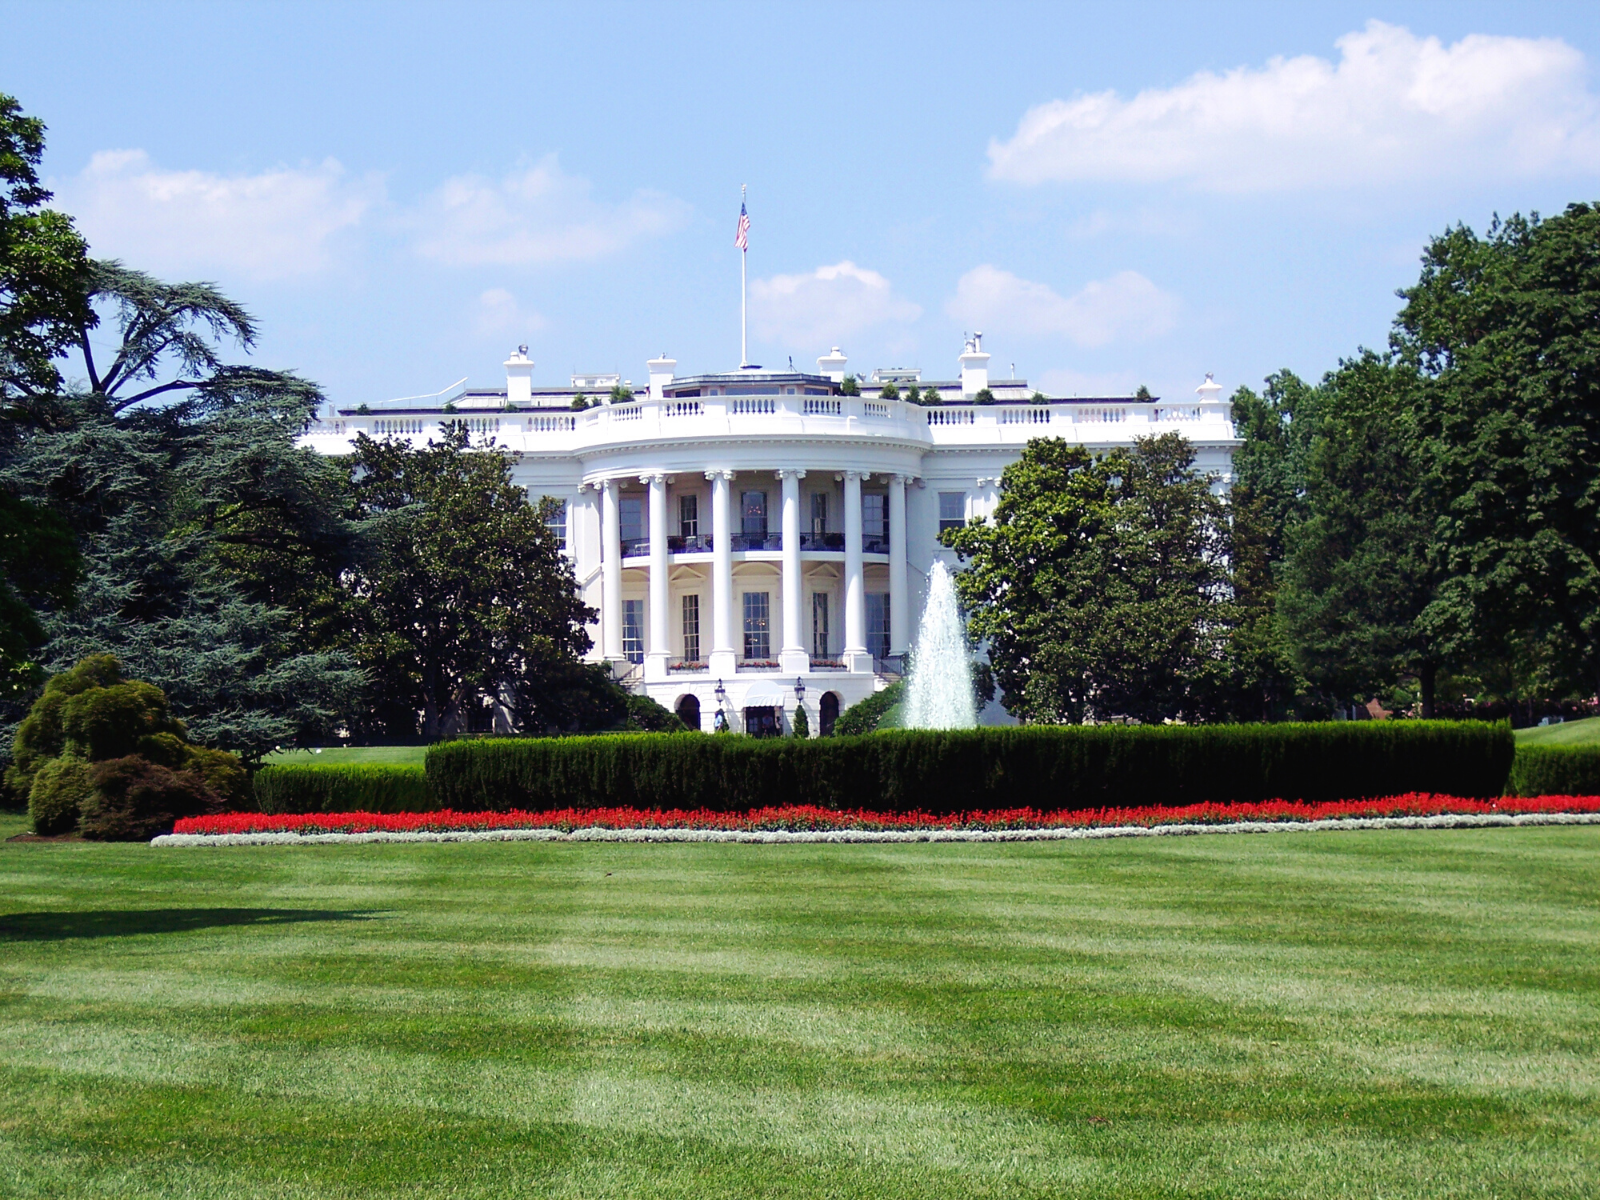 Image of the White House with a blue sky and red and white flowers in the forefront.